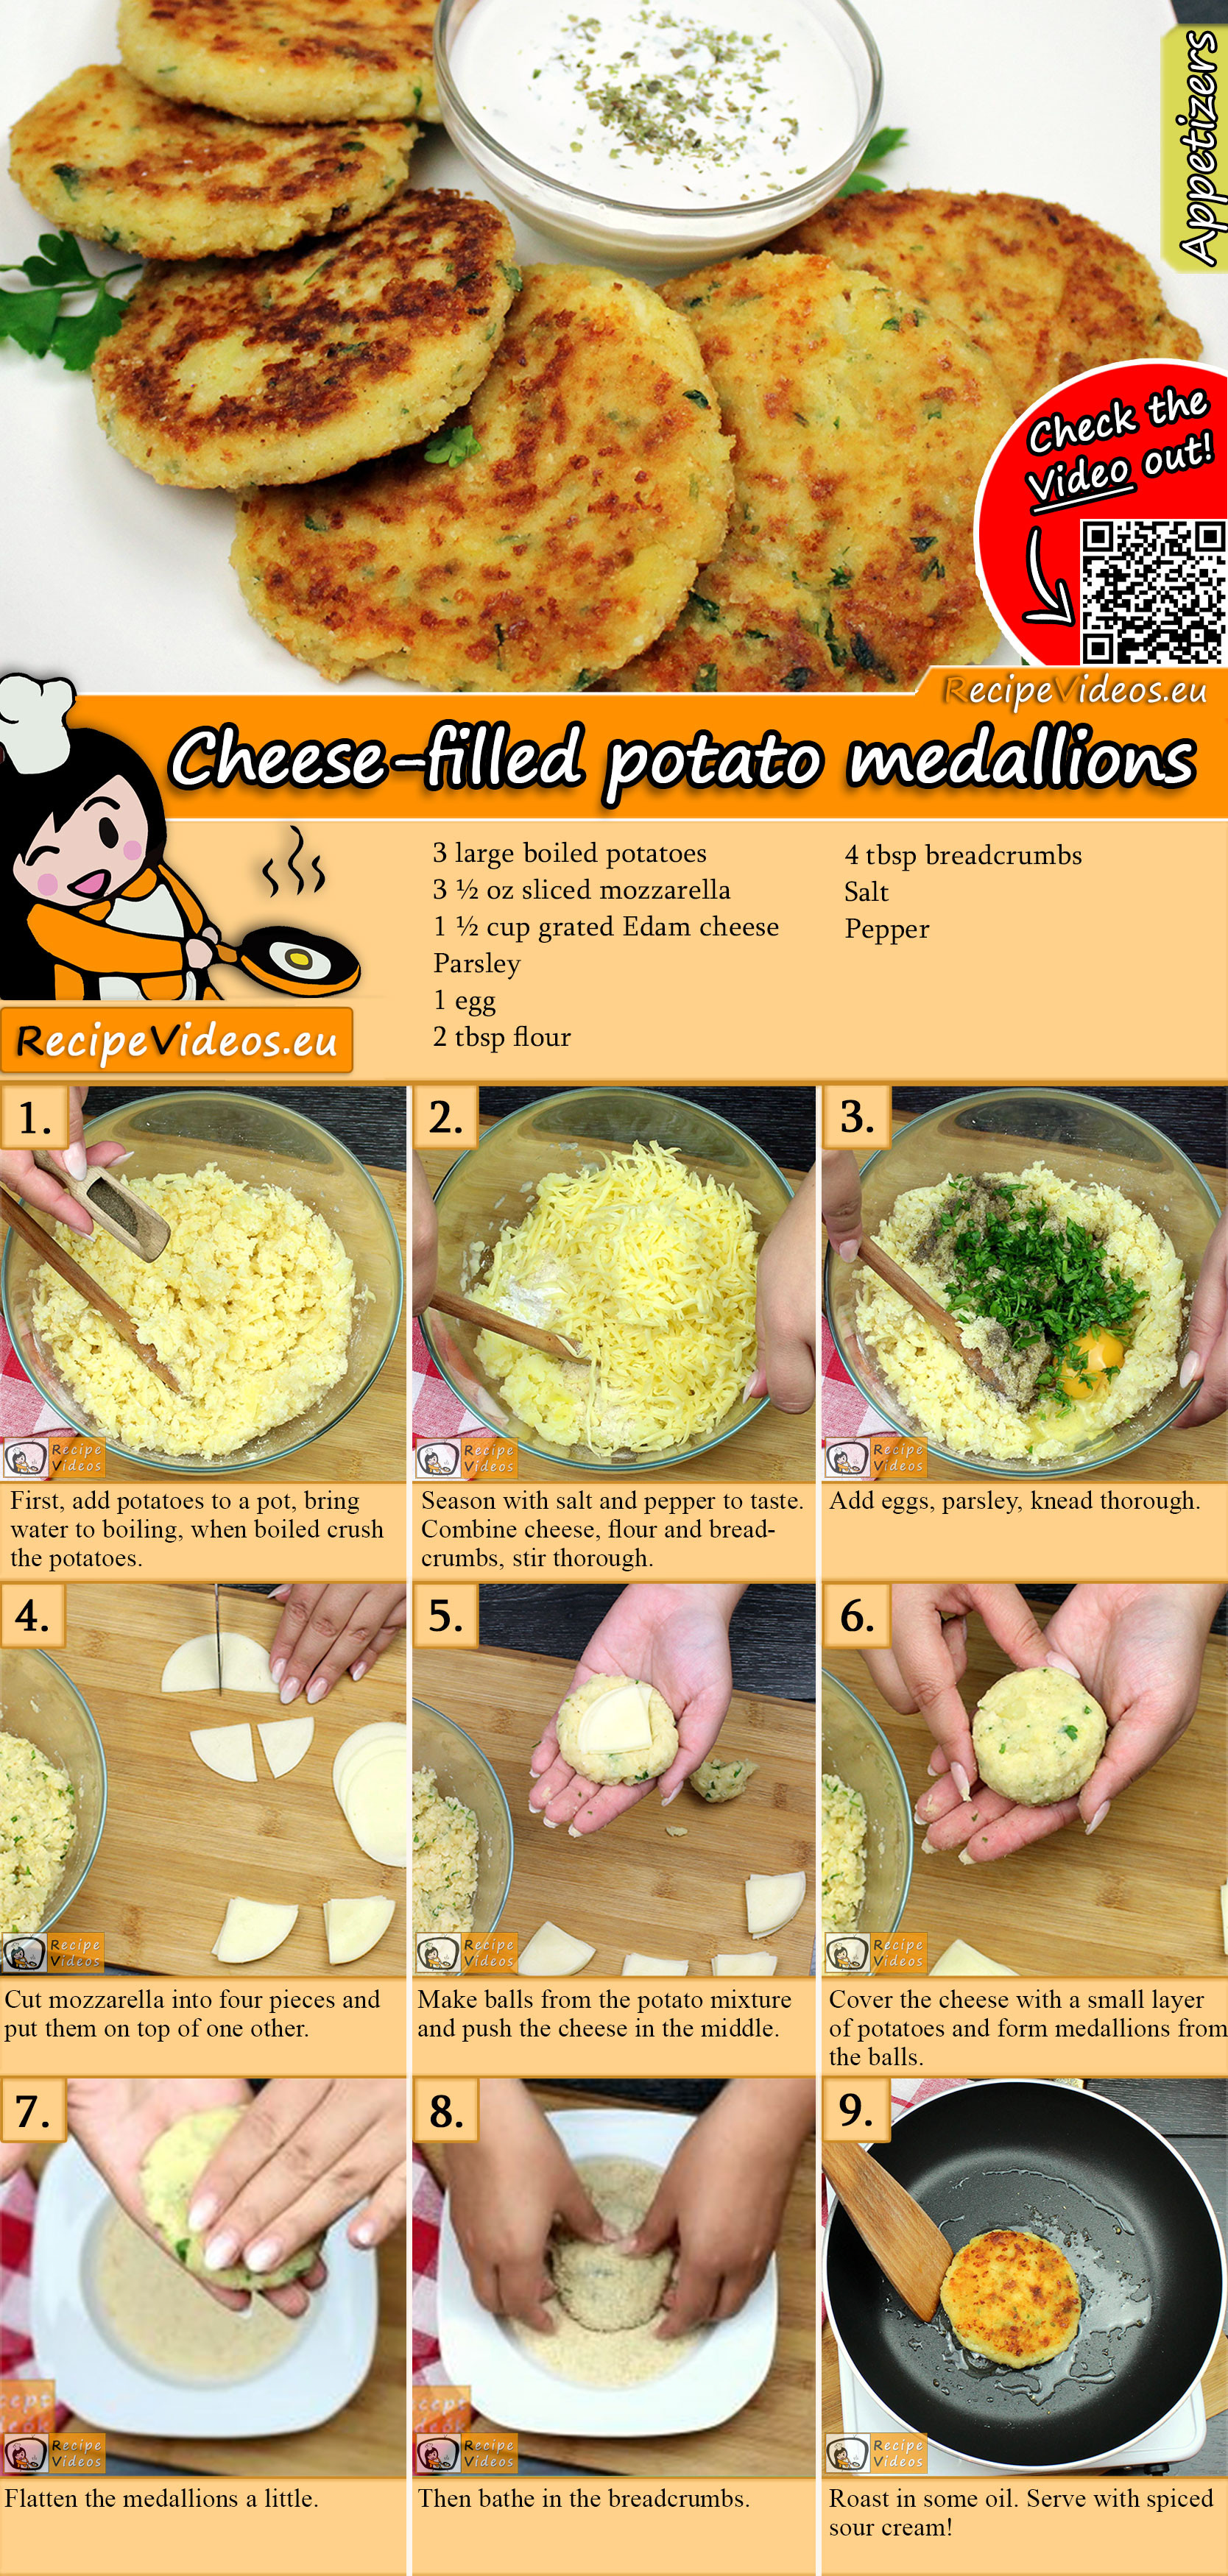 Cheese-filled potato medallions recipe with video